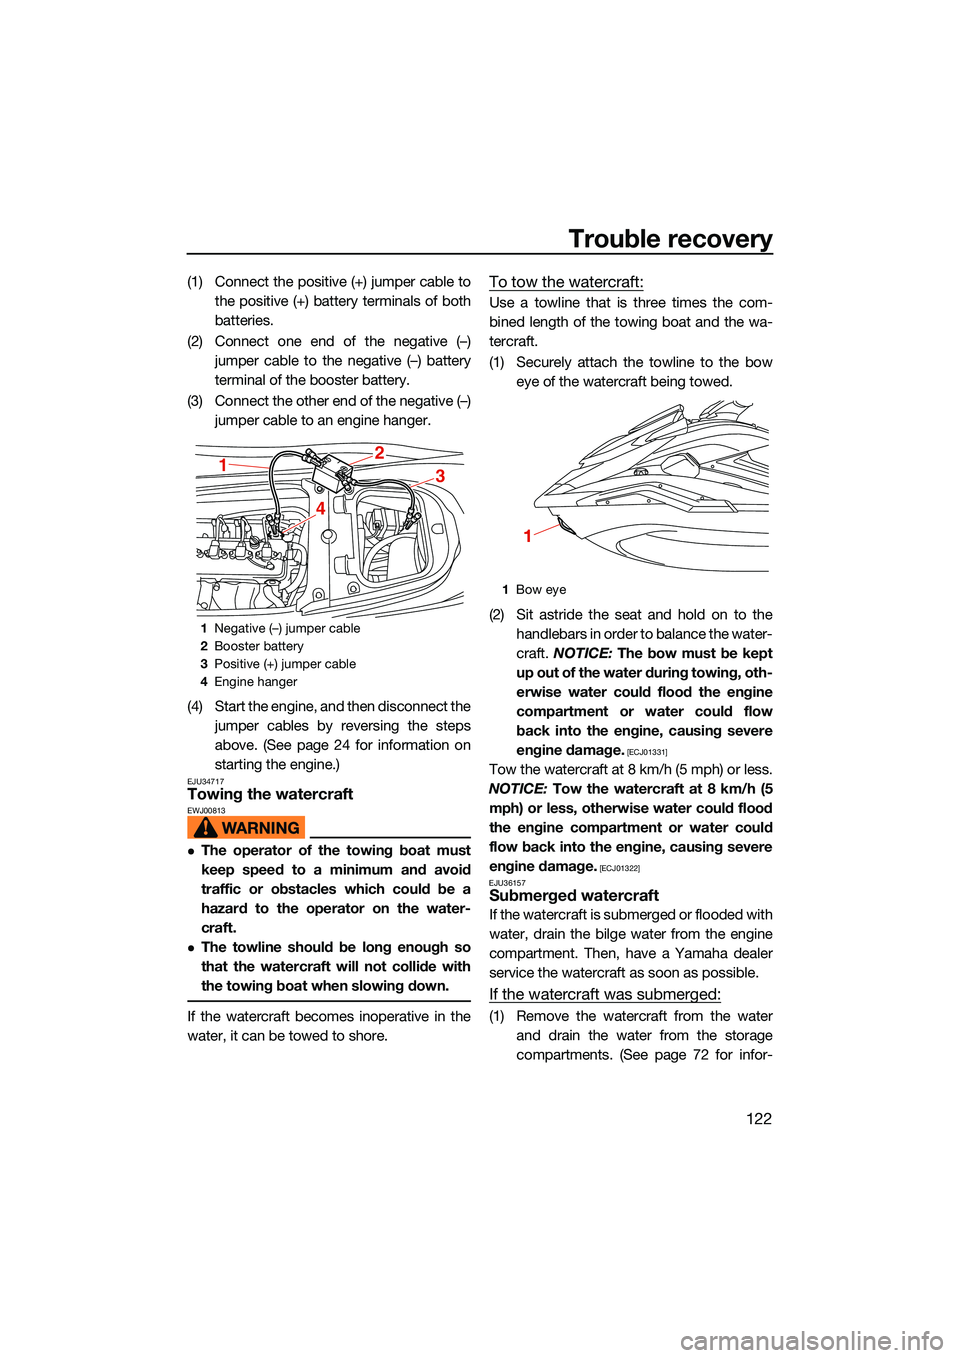 YAMAHA FX HO 2022  Owners Manual Trouble recovery
122
(1) Connect the positive (+) jumper cable tothe positive (+) battery terminals of both
batteries.
(2) Connect one end of the negative (–) jumper cable to the negative (–) batt